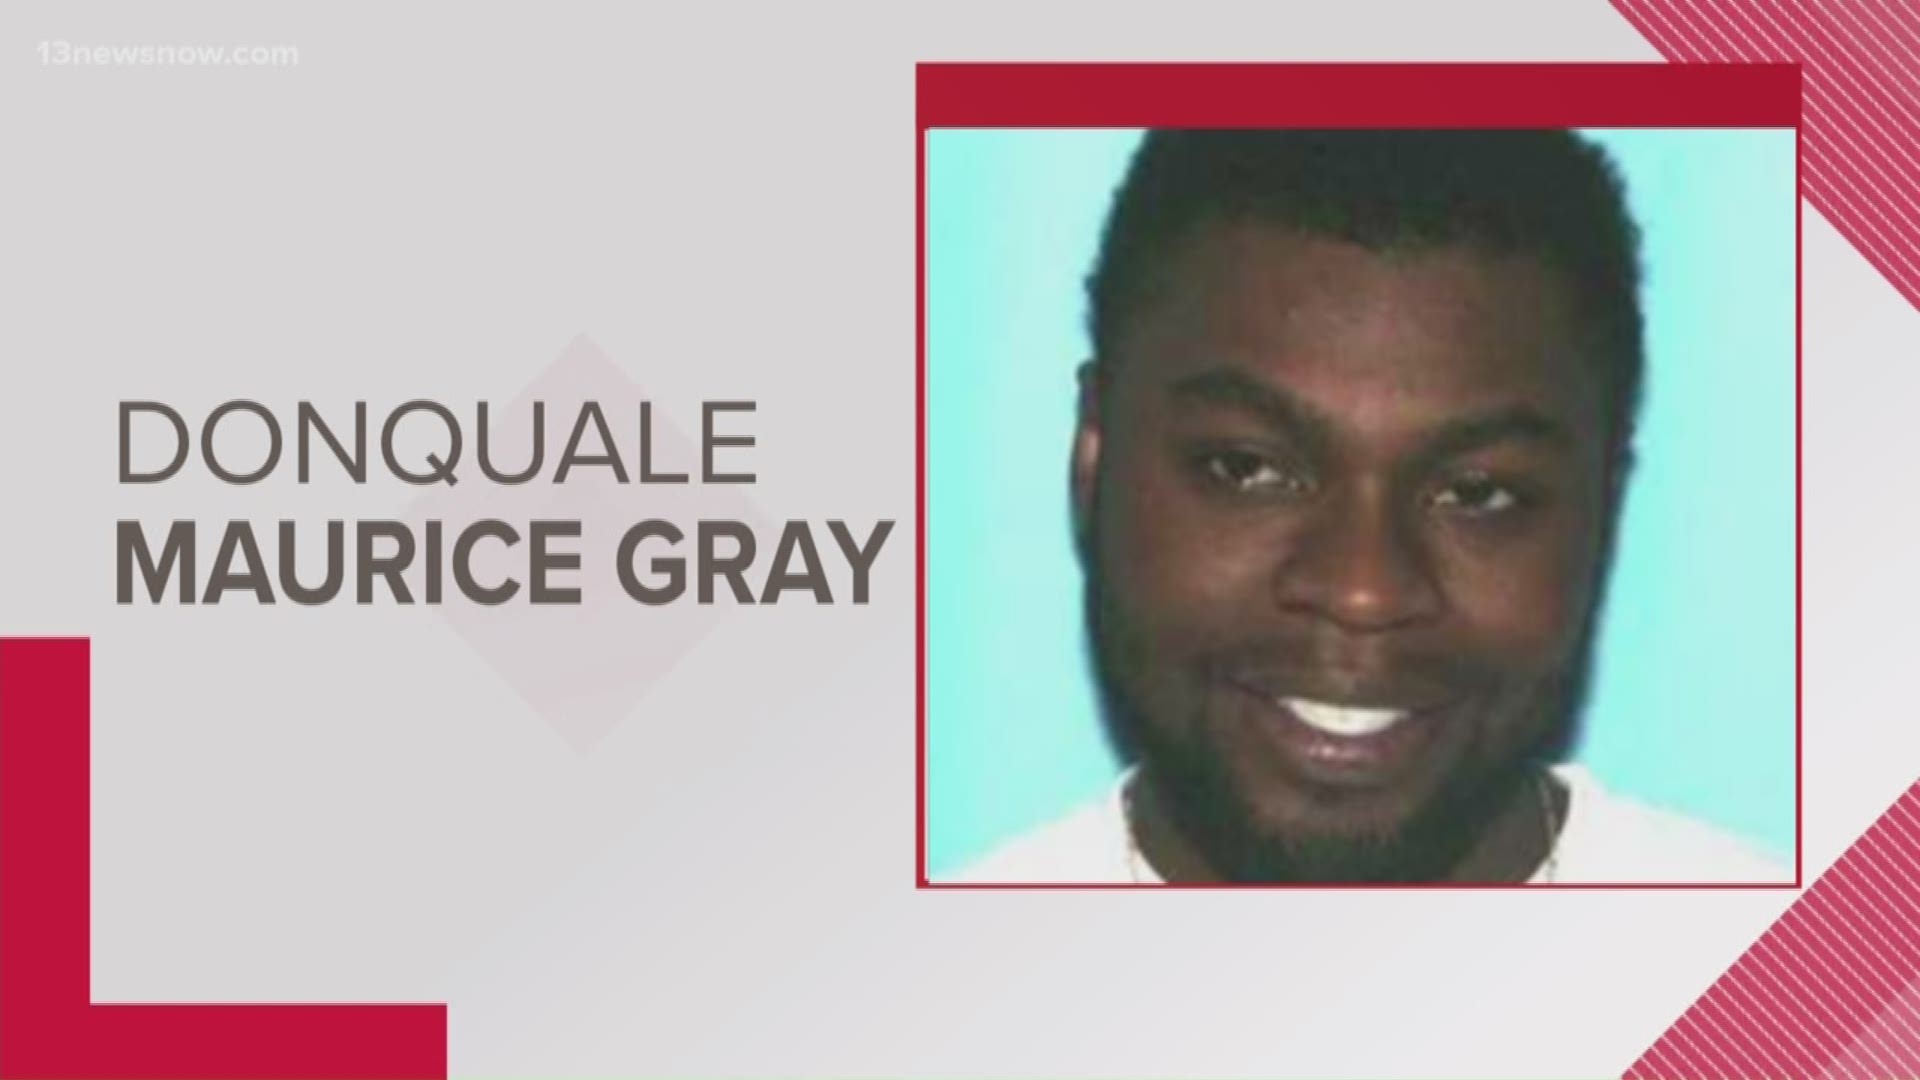 Donquale Maurice Gray, 25, is believed to be armed and dangerous, police said.